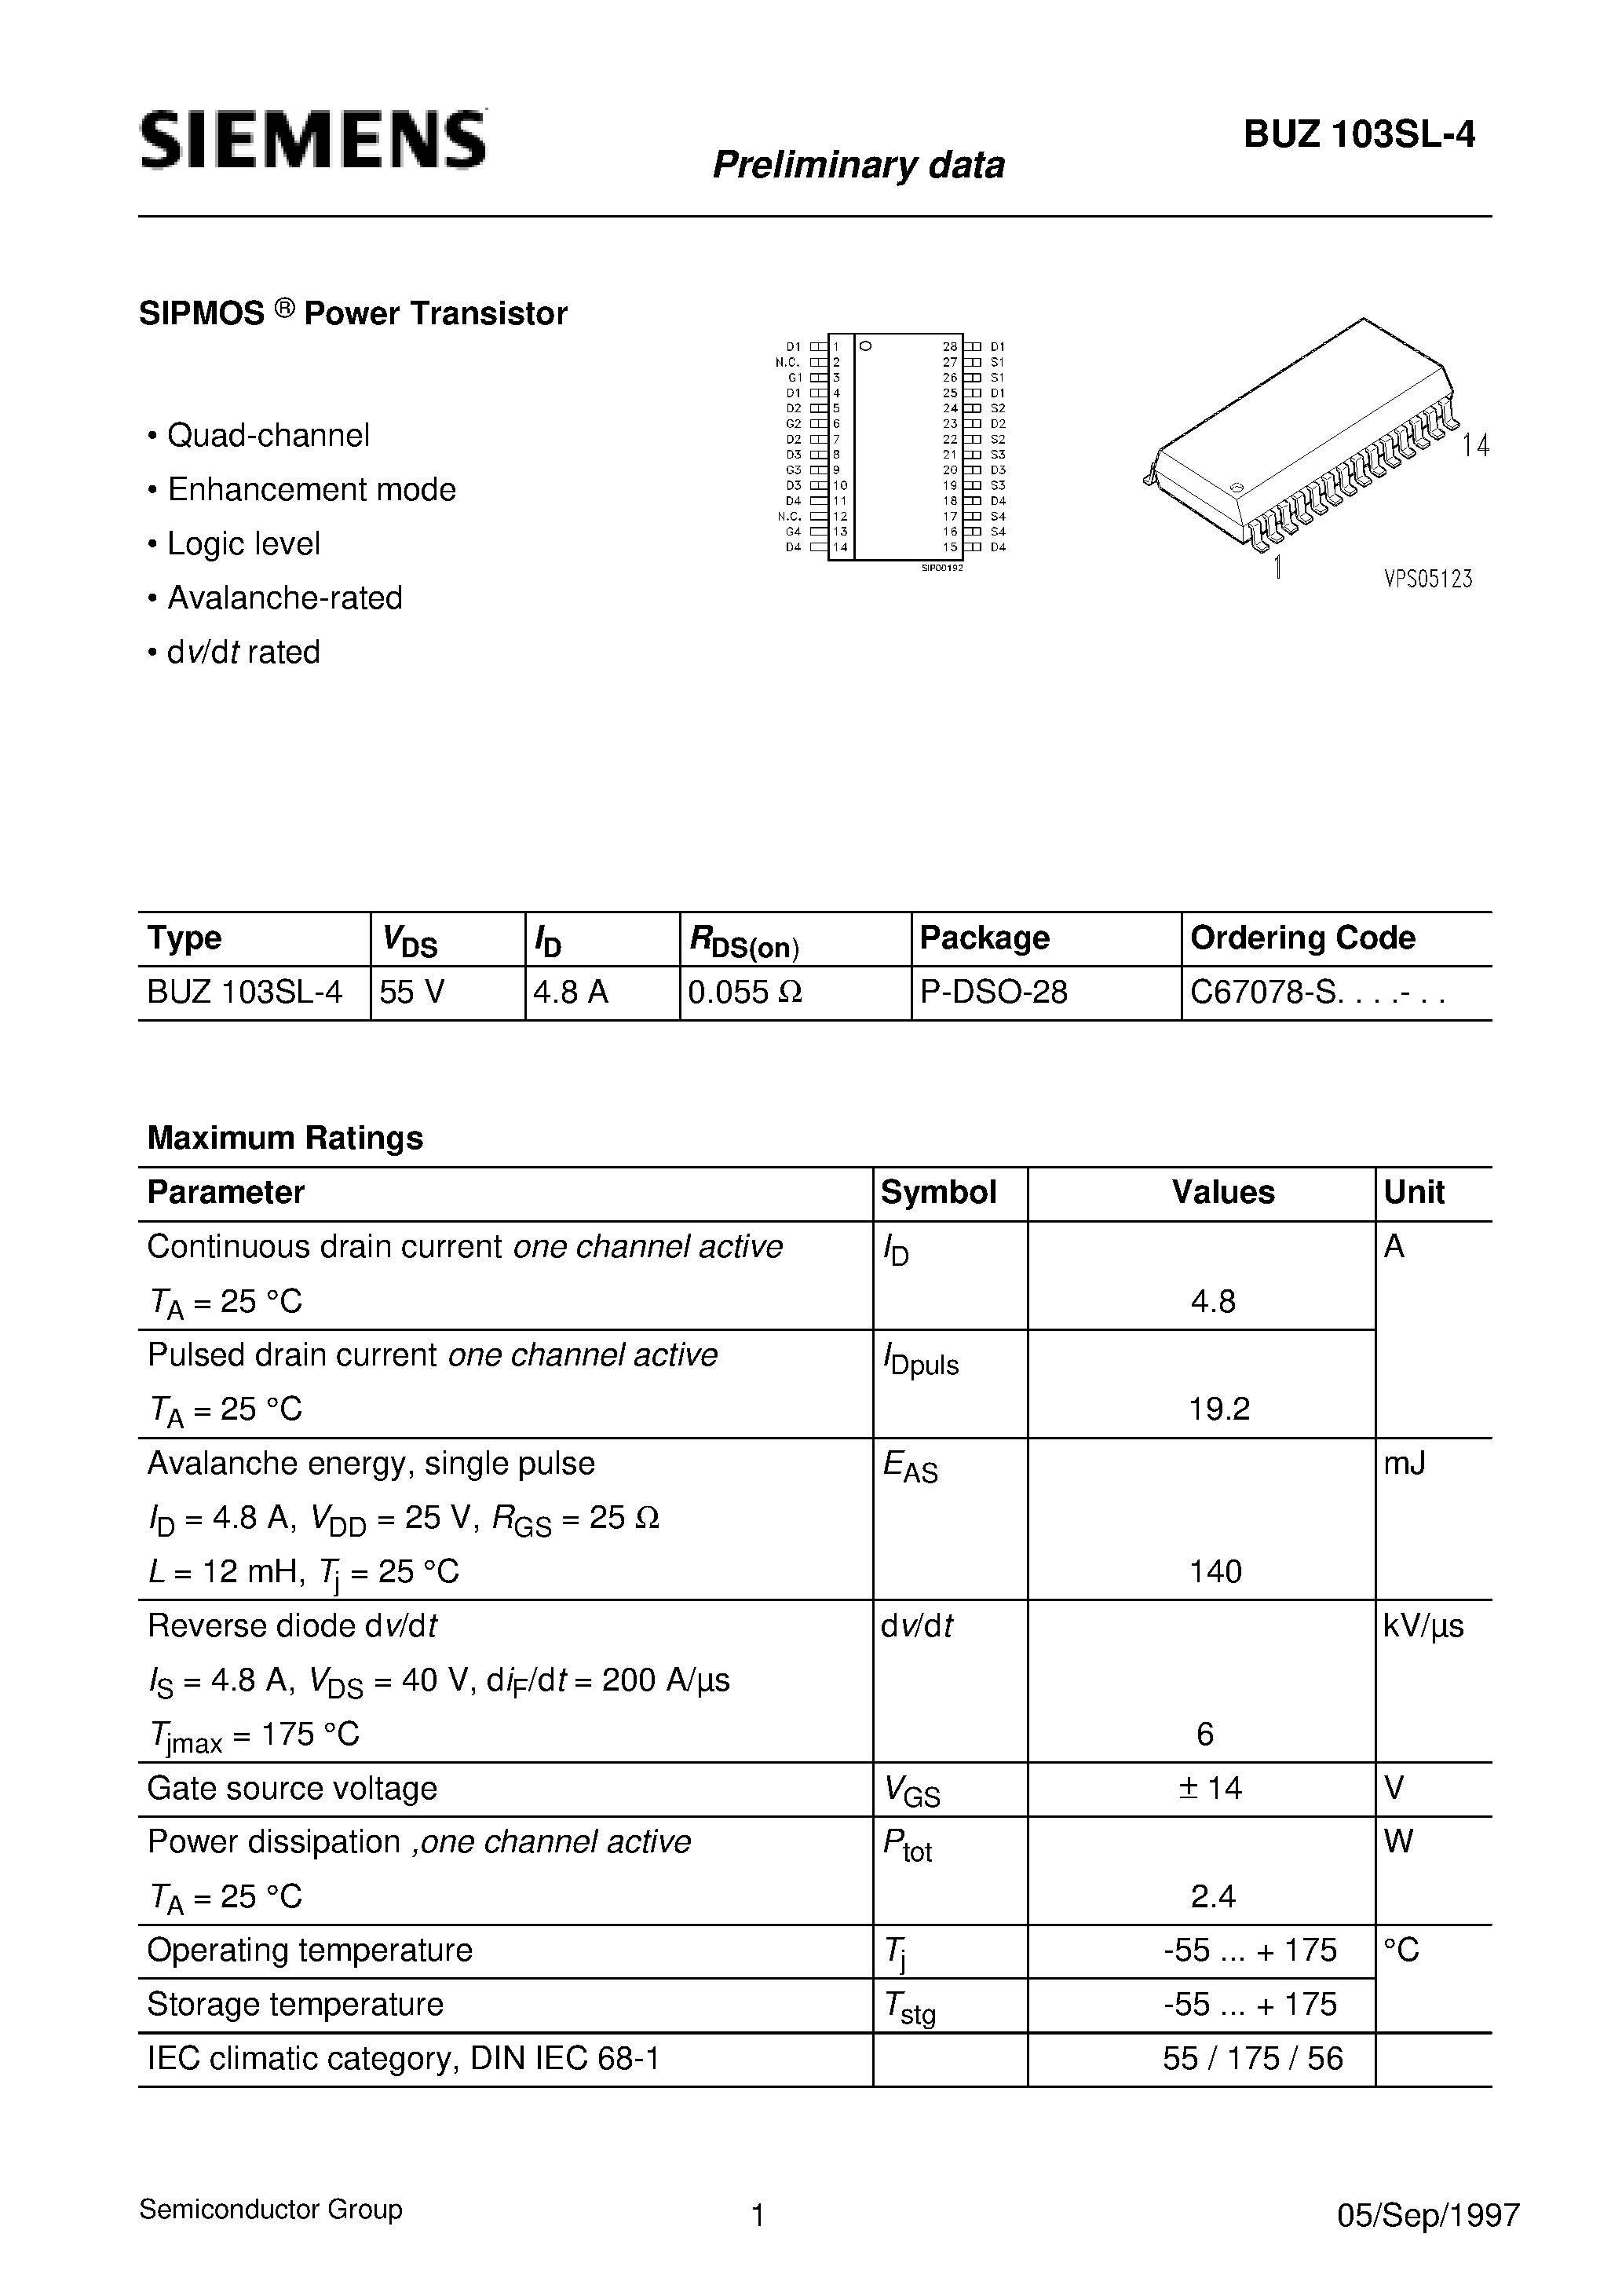 Datasheet BUZ103SL-4 - SIPMOS Power Transistor (Quad-channel Enhancement mode Logic level Avalanche-rated d v/d t rated) page 1